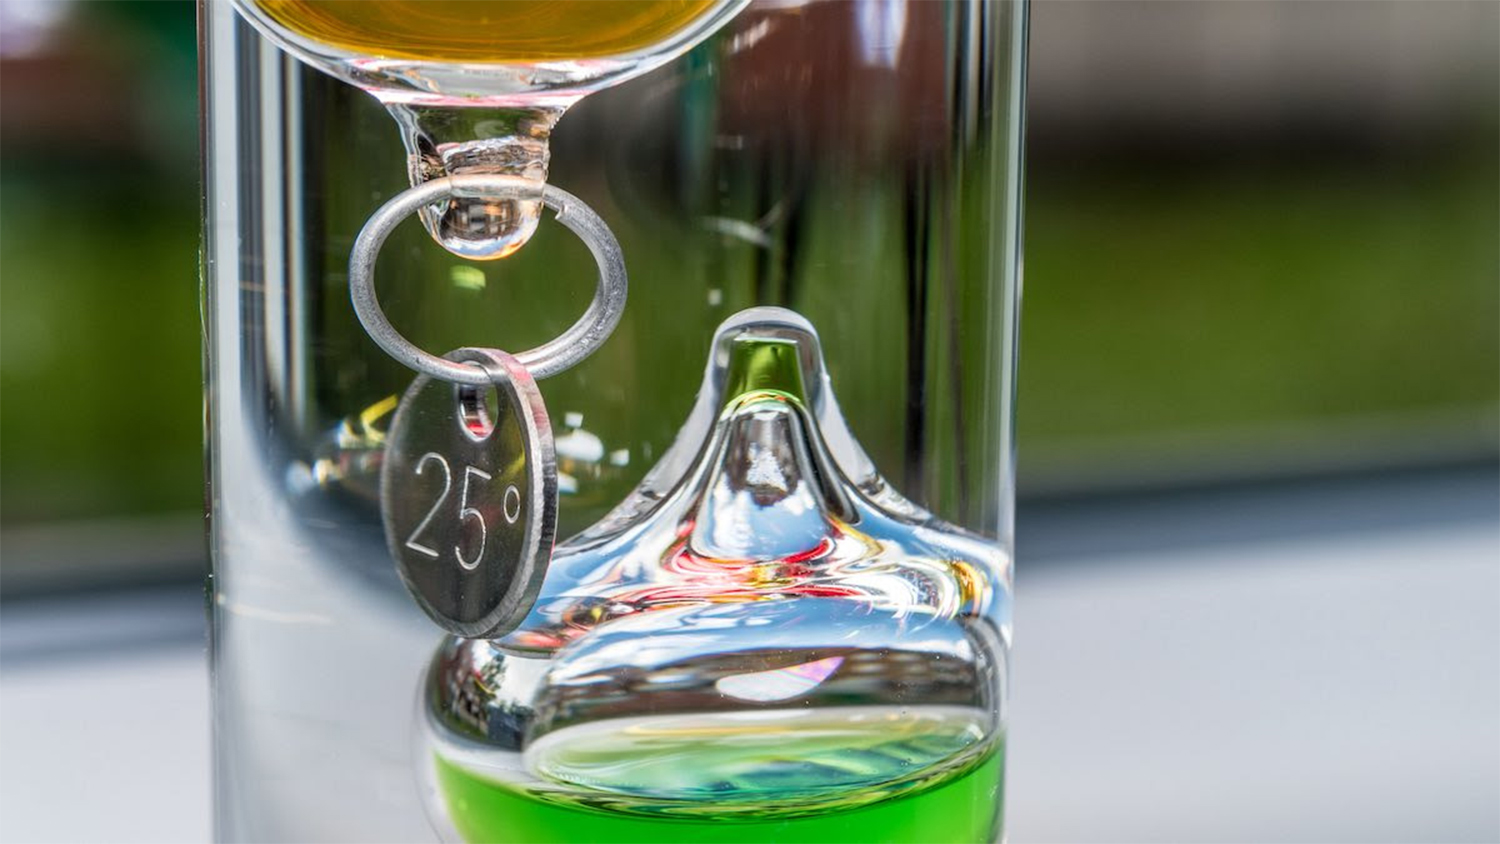 Close up of a Galileo thermometer Credit: HMVart / iStock / Getty Images Plus